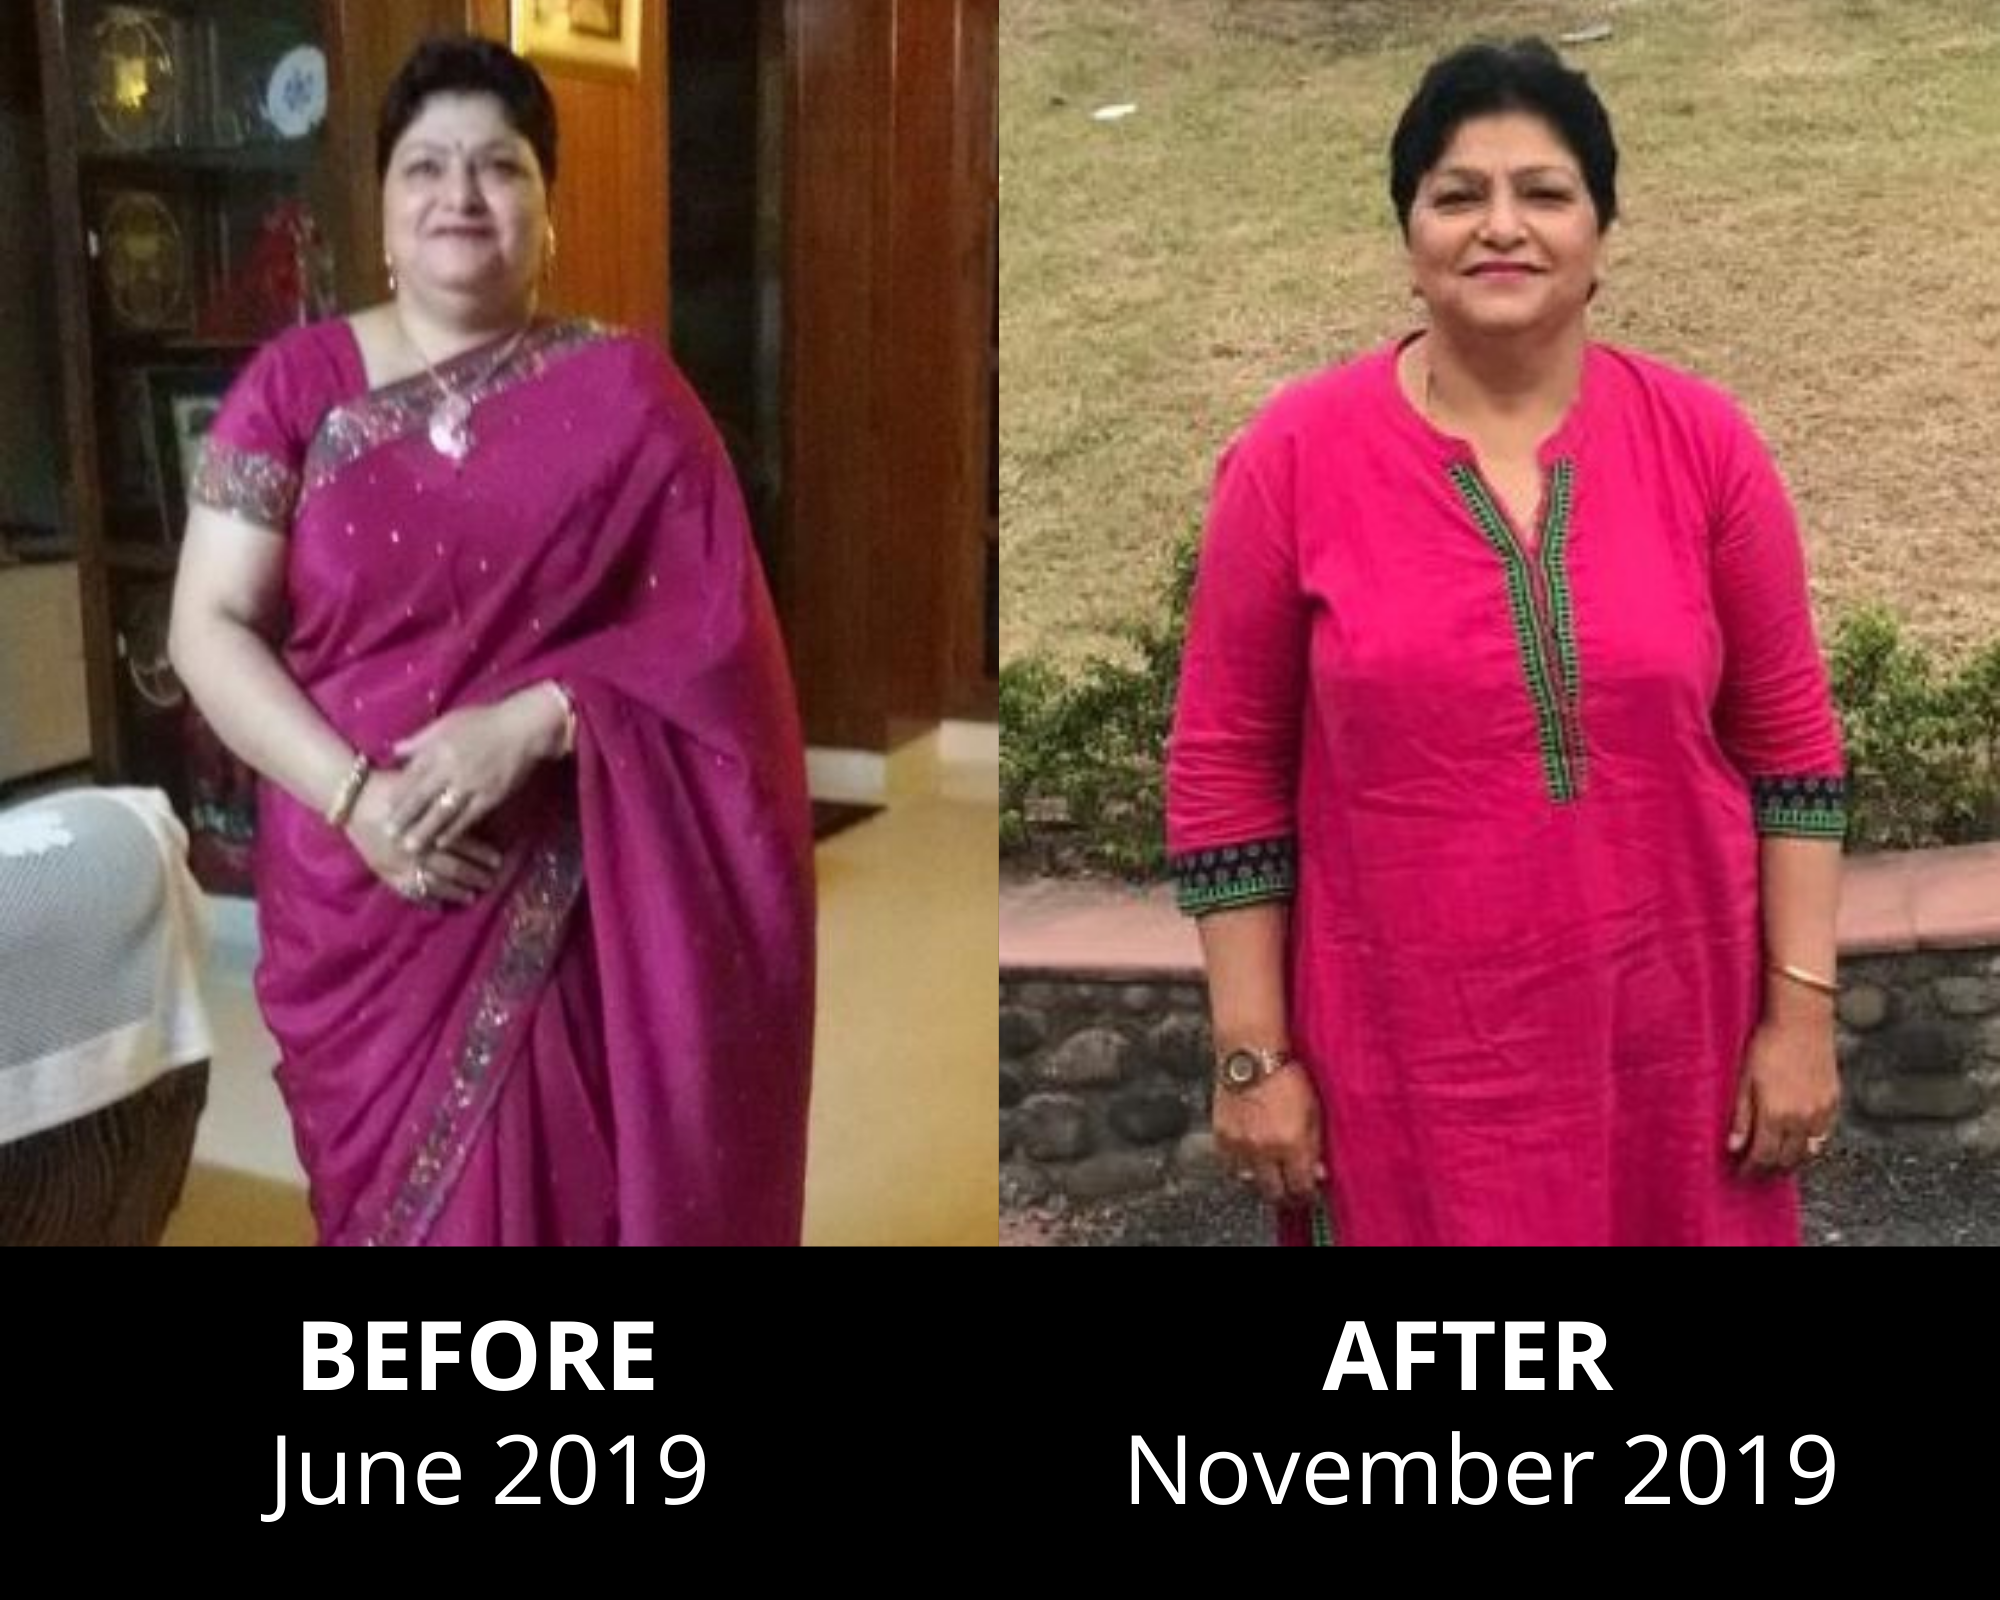 60-year-old Sangeeta reverses her 30-year-old diabetes and hypothyroidism in 4 months